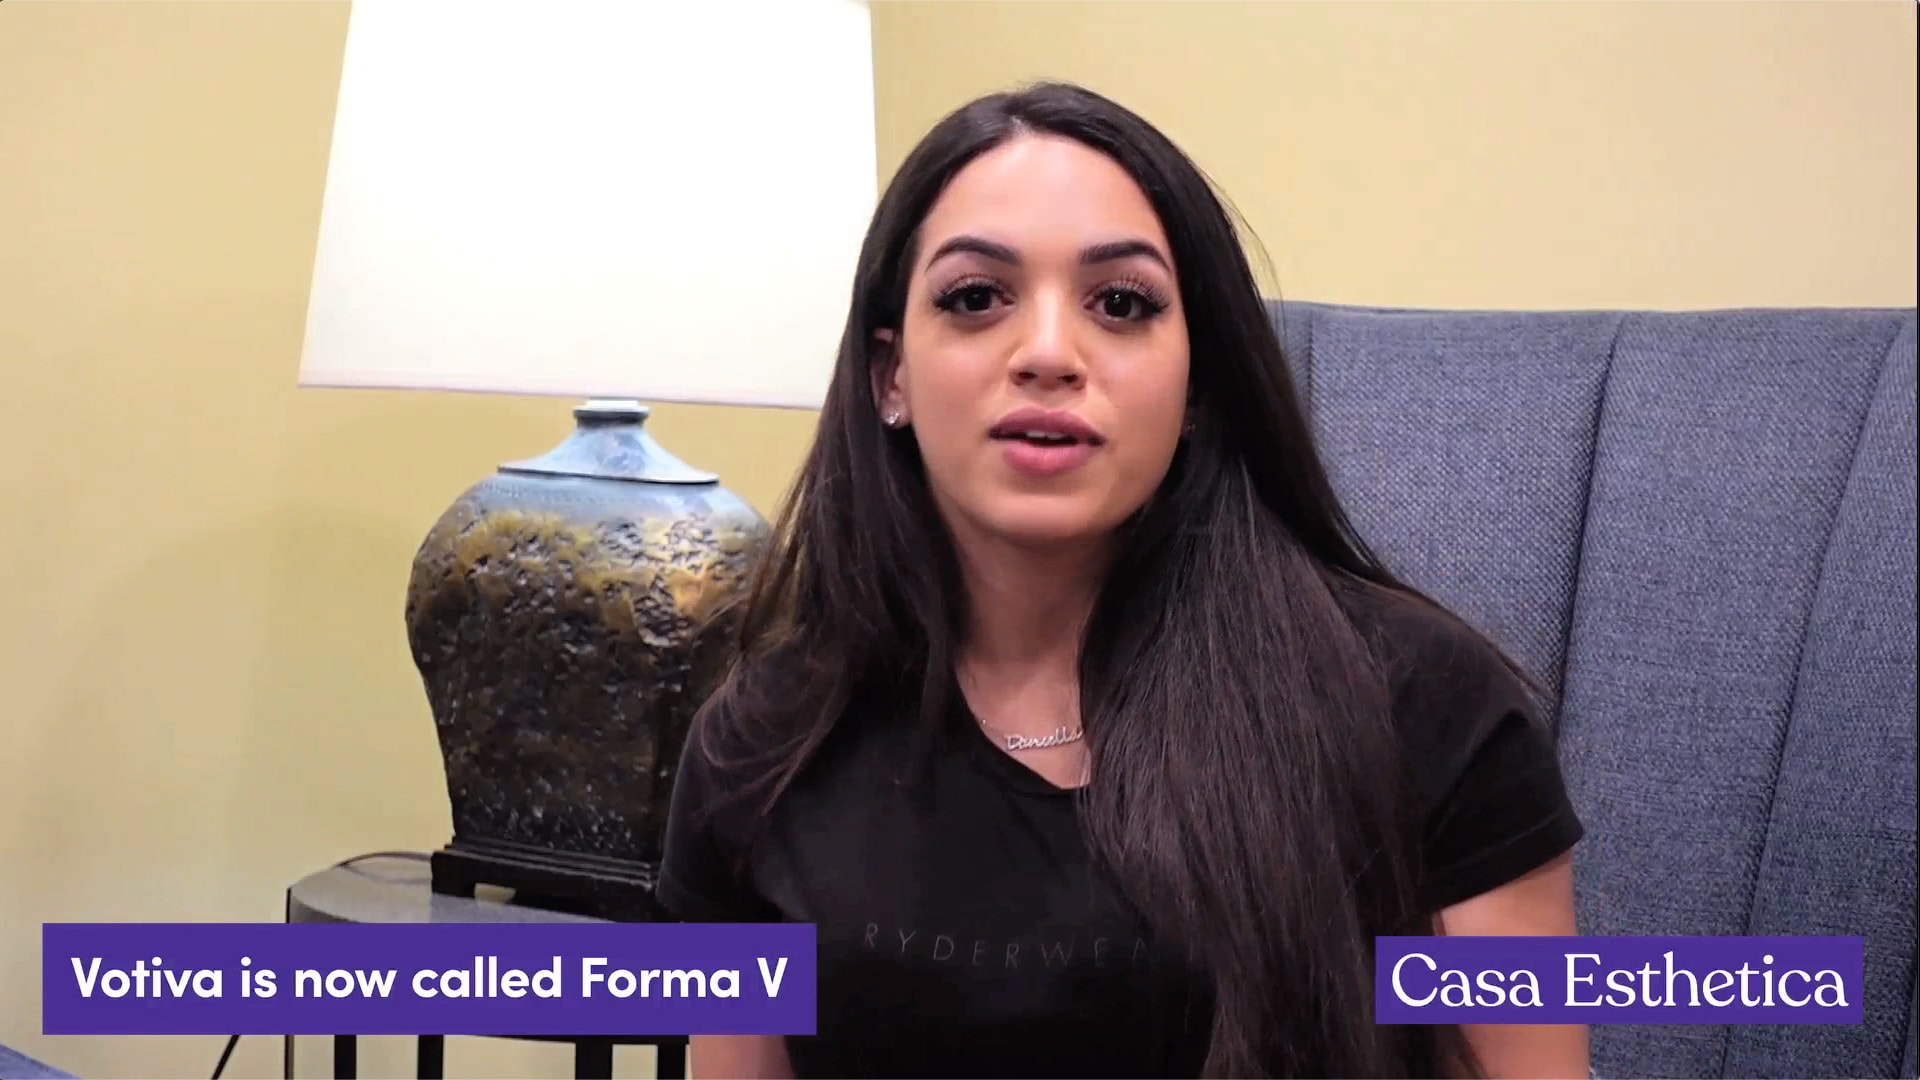 After a Mommy Makeover, Daniella tells how Votiva / Forma V helped her regain confidence and feel like she never had a baby